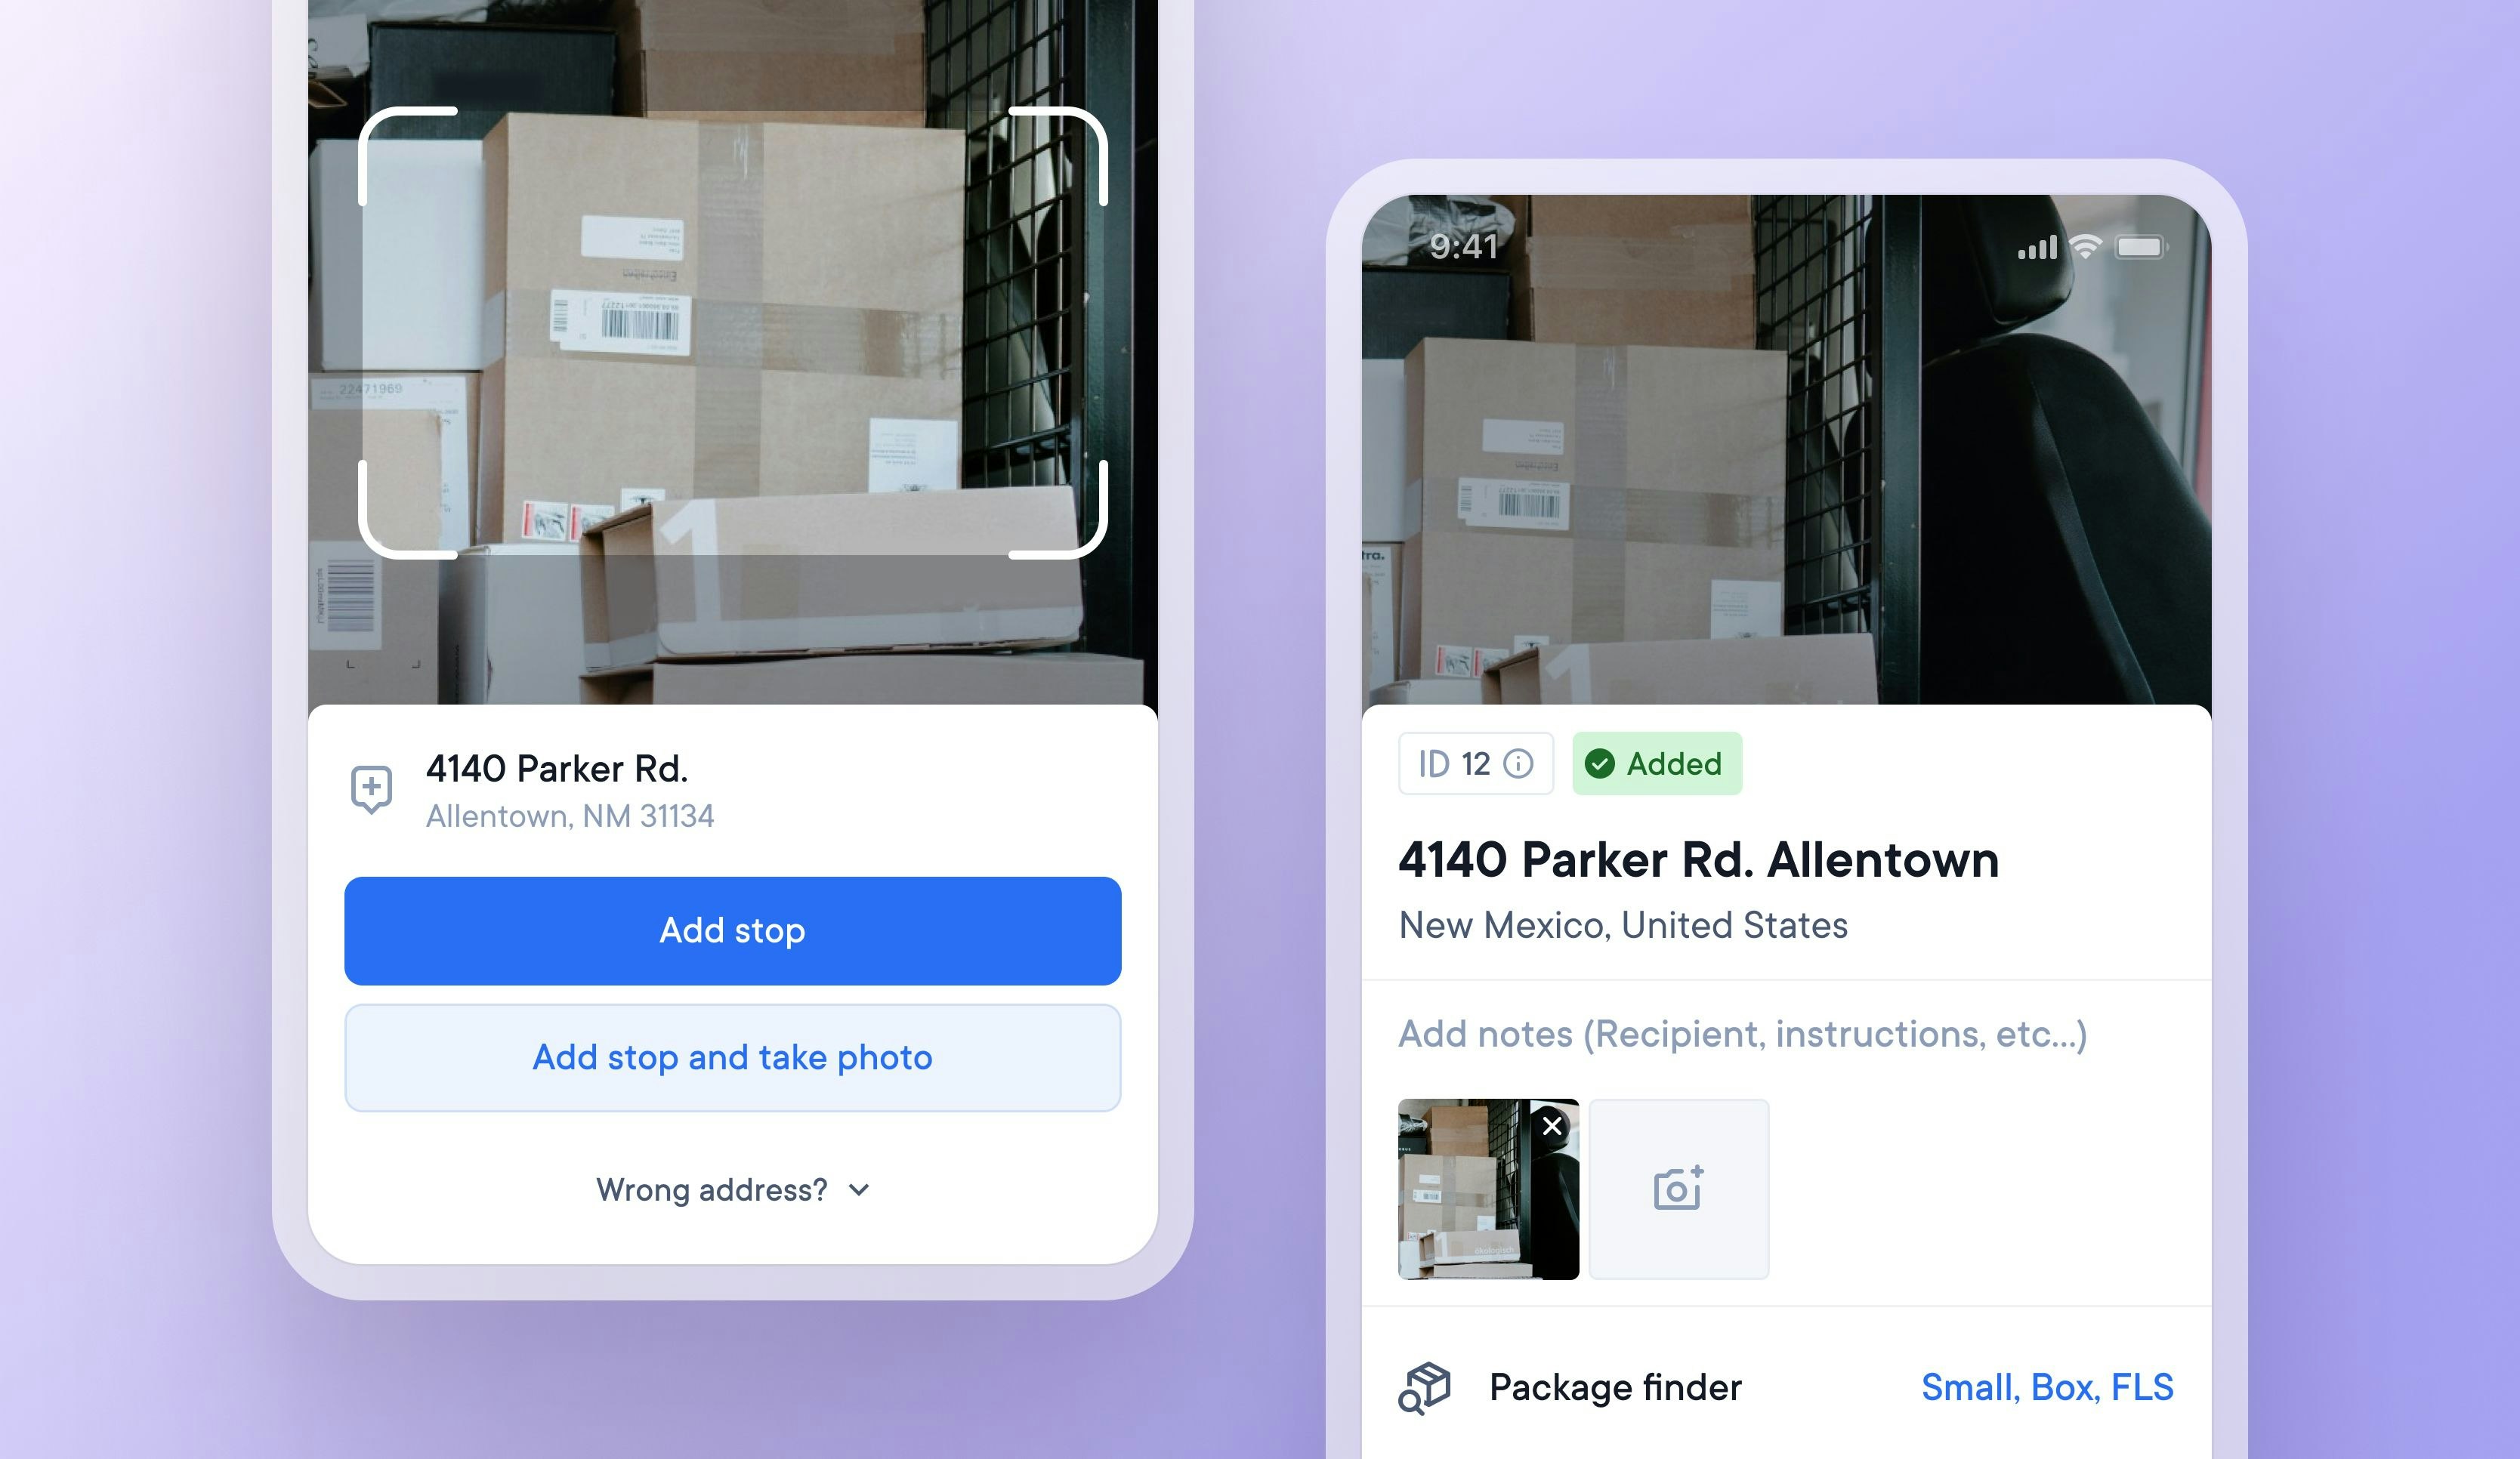 Take a photo of packages for easier location